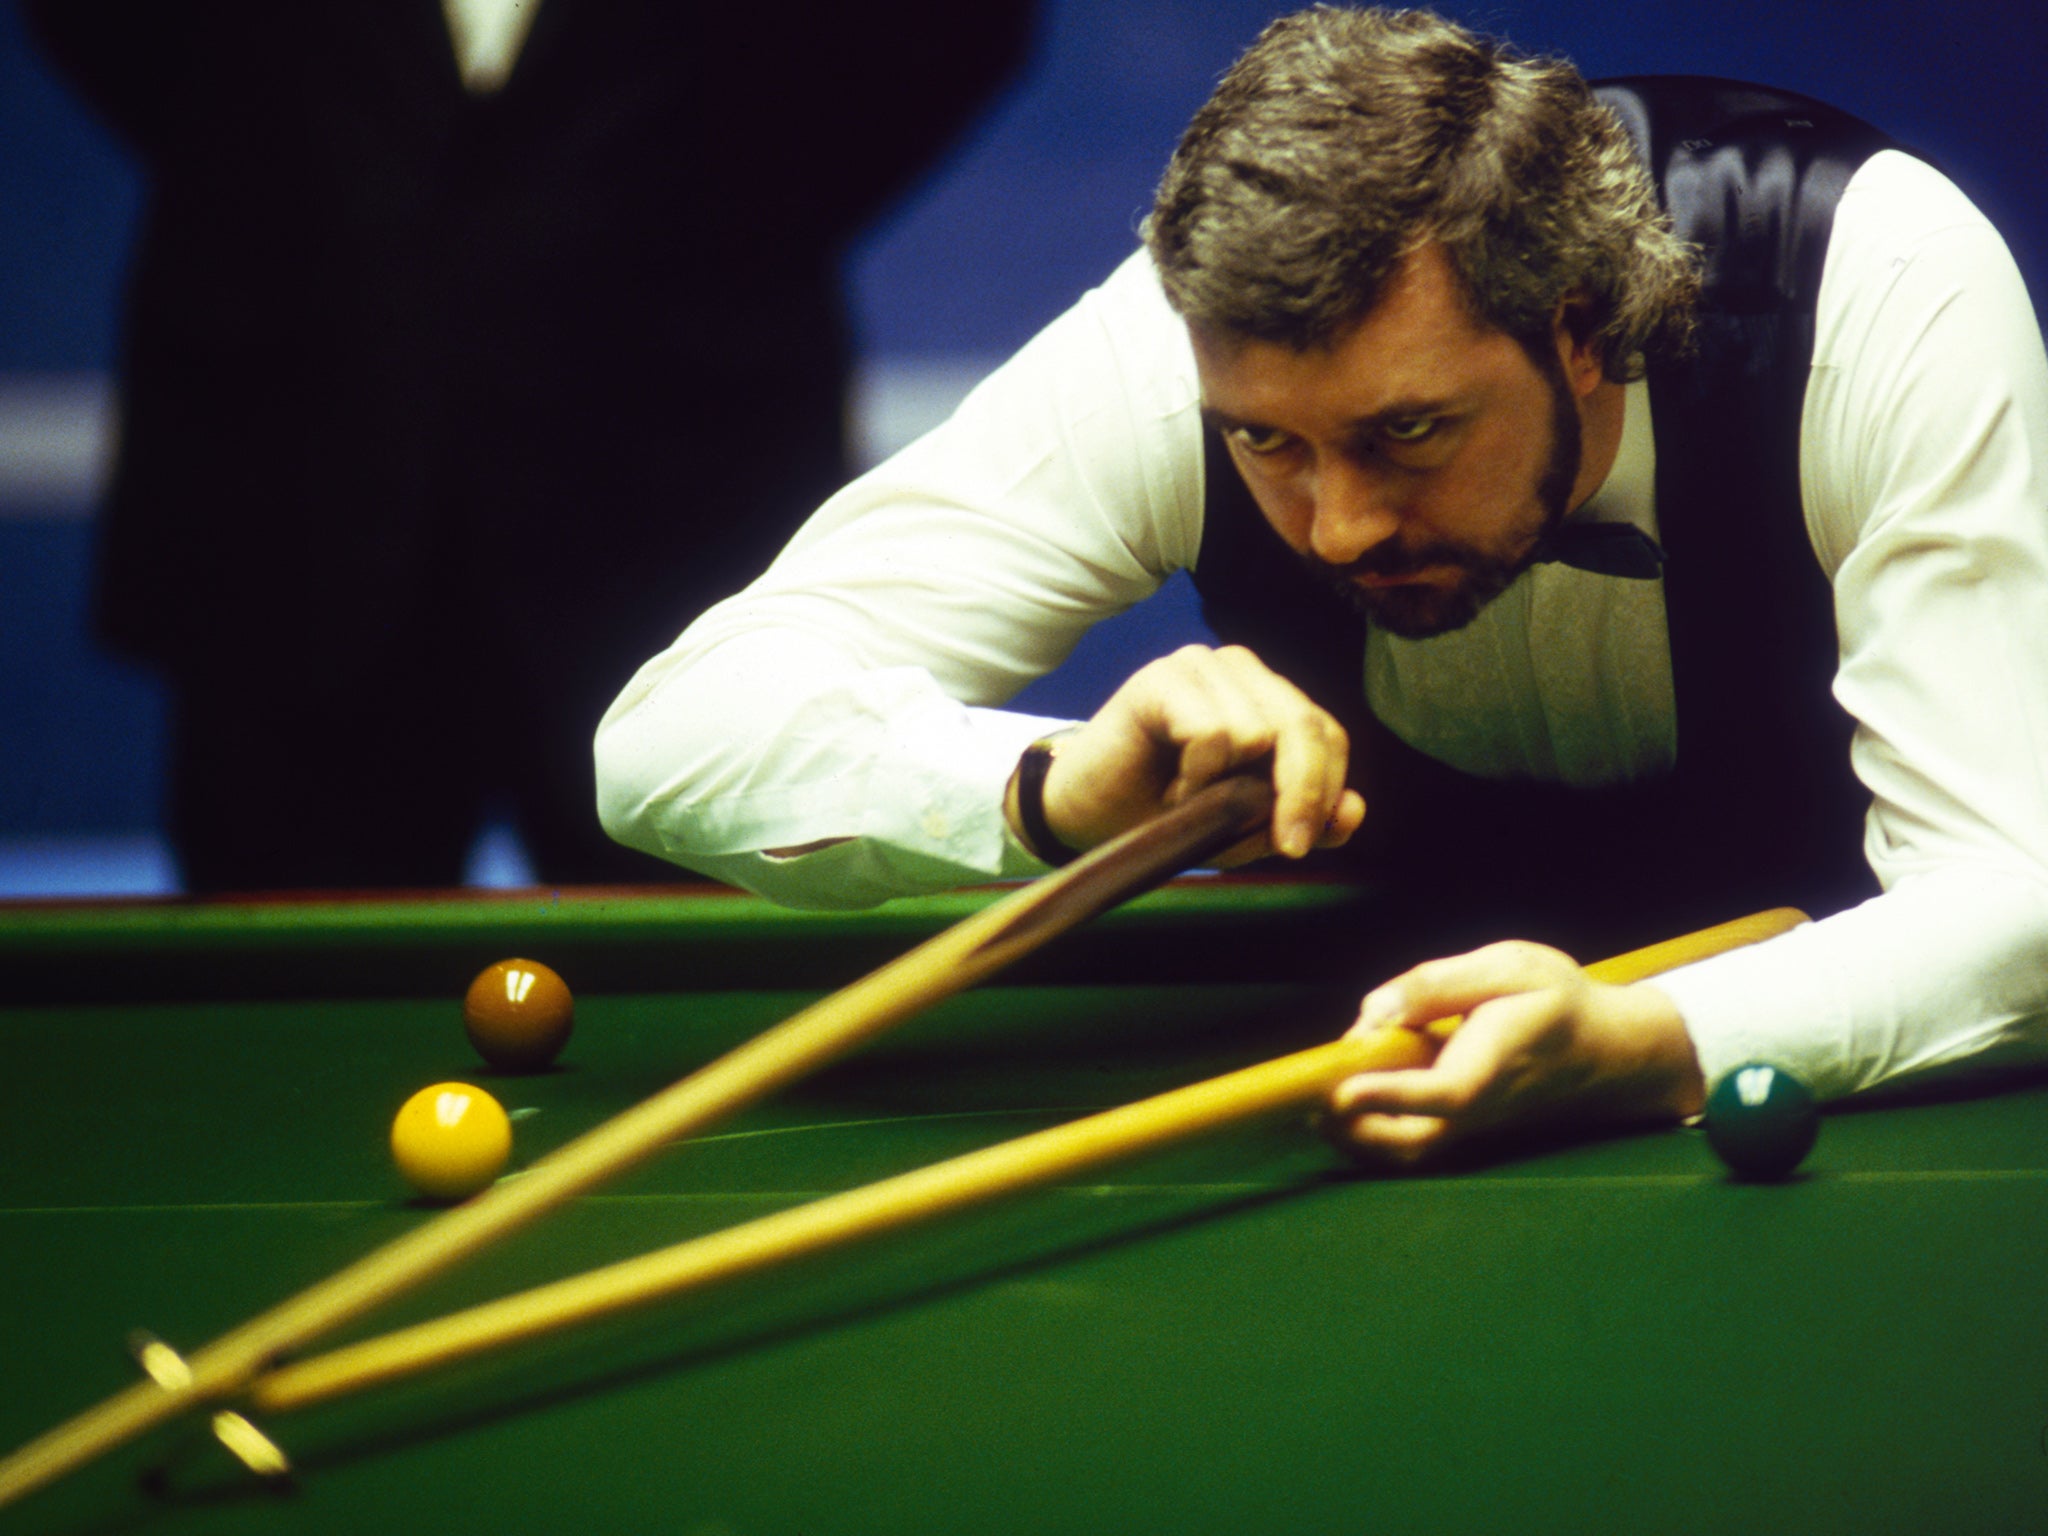 John Virgo Snooker commentator swears live on air during World Championship semi-final The Independent The Independent